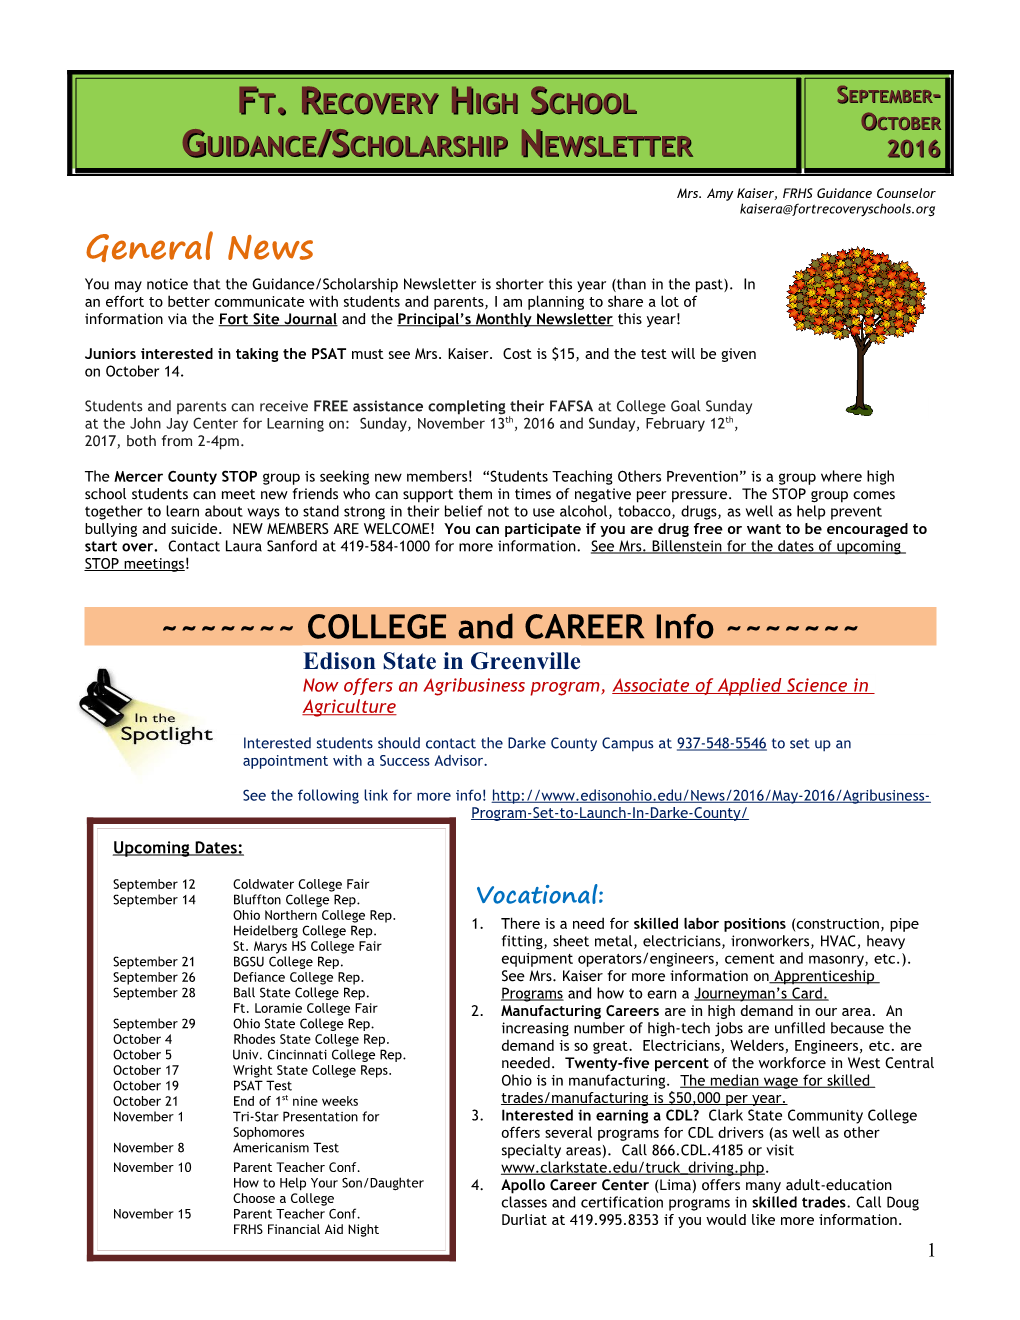 FT. Recovery High School Guidance/Scholarship Newsletter